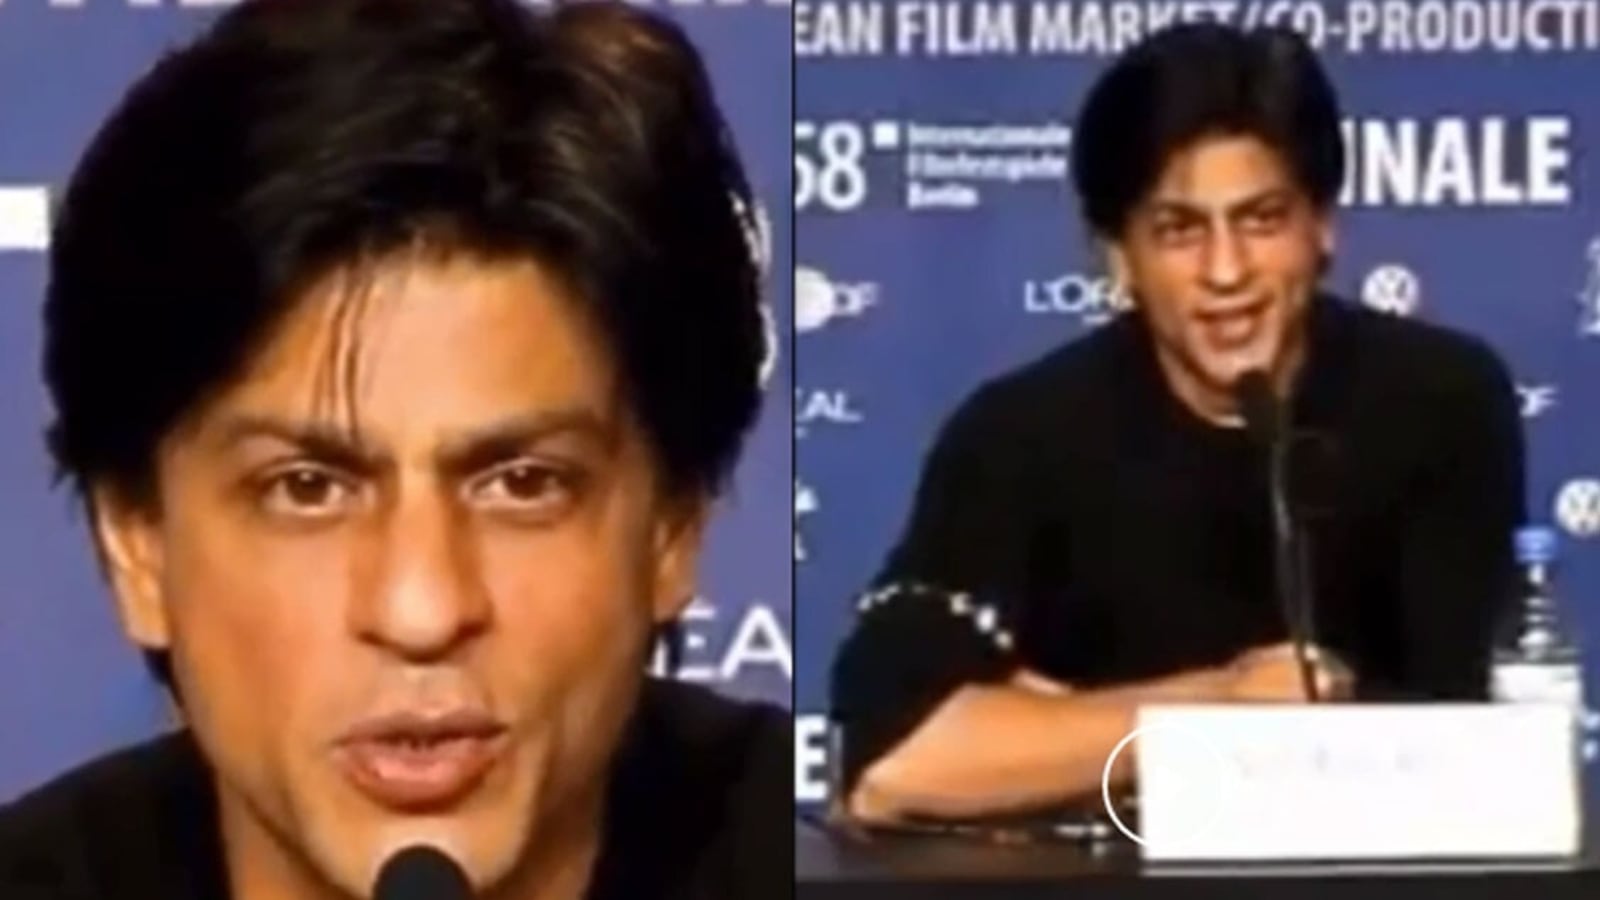 Shah Rukh Khan Fans Dig Up Old Video Of His Humble Reply About Never Leaving Bollywood Amid